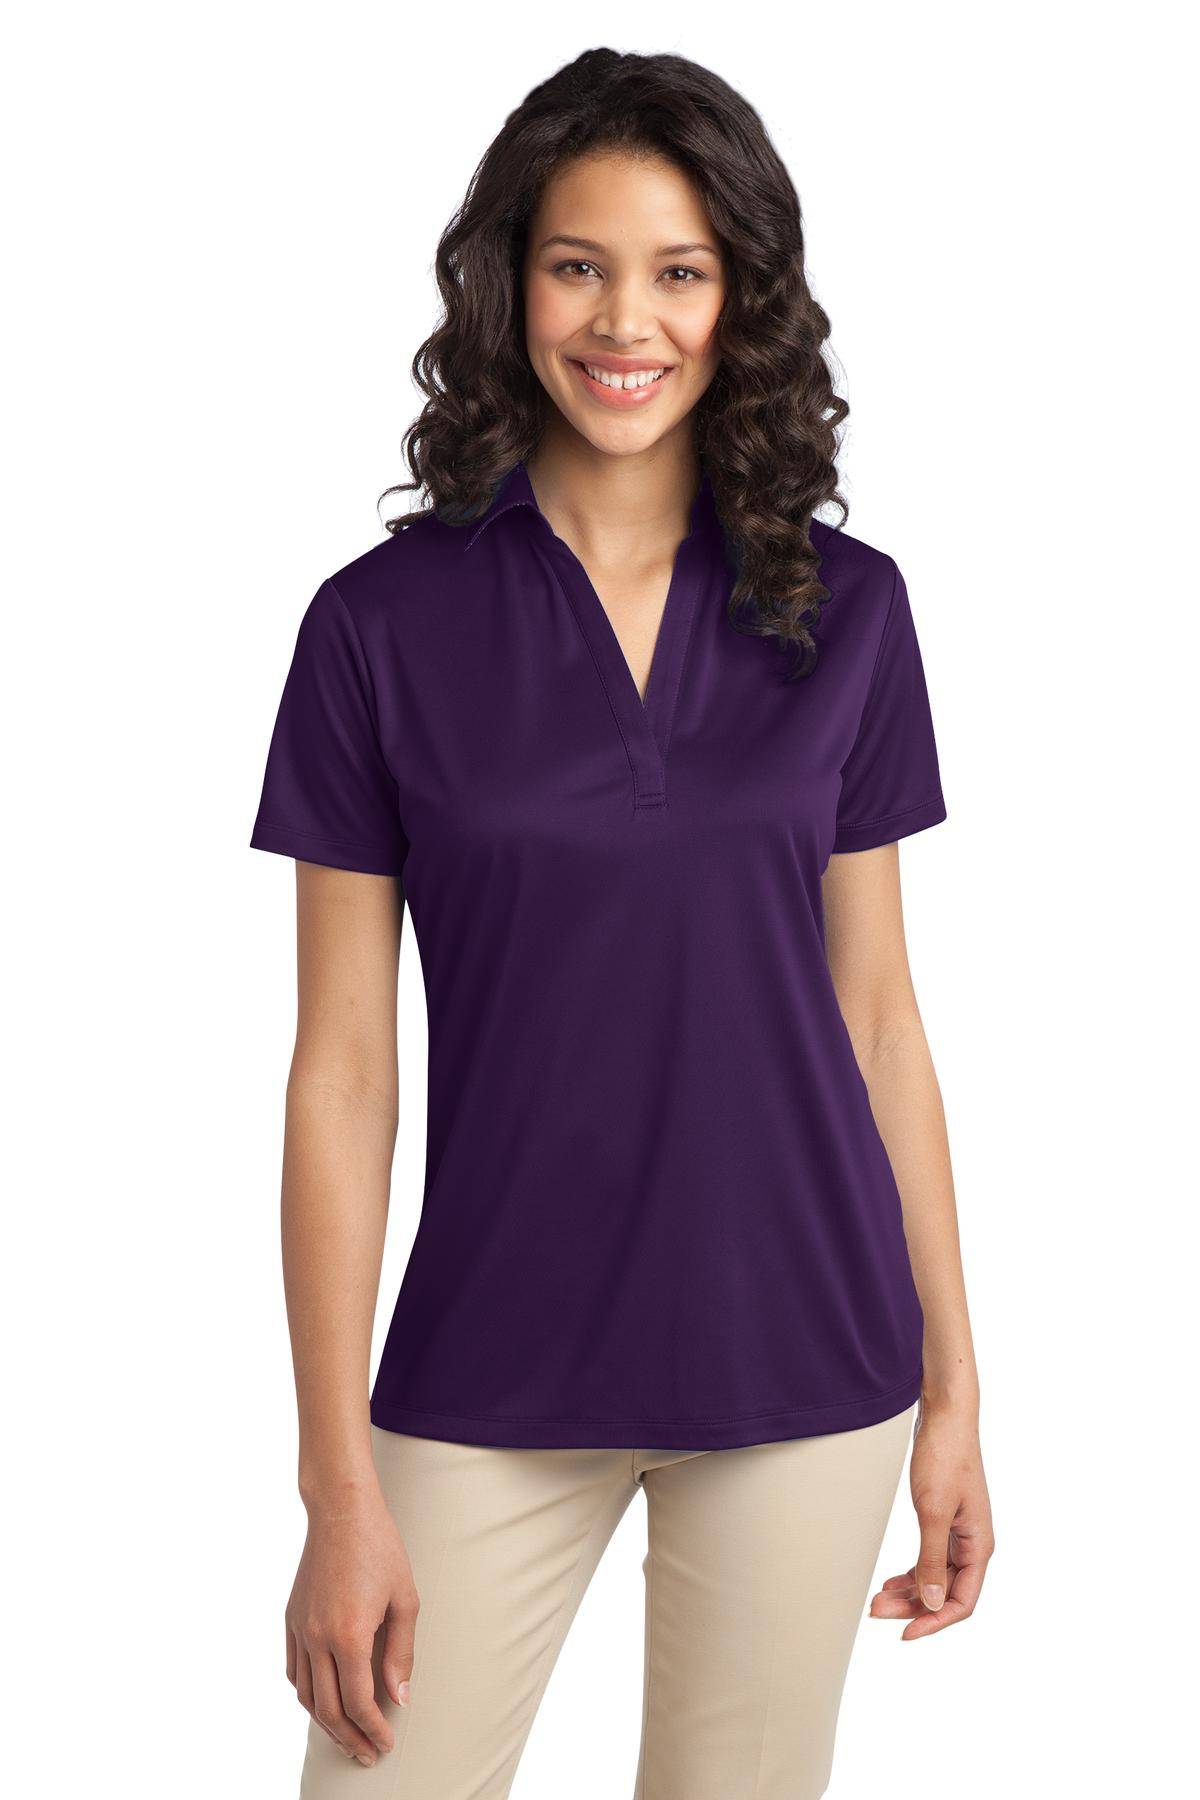 Port Authority L540 Womens Short Sleeve Moisture Wicking Silk Touch Performance Polo Shirt